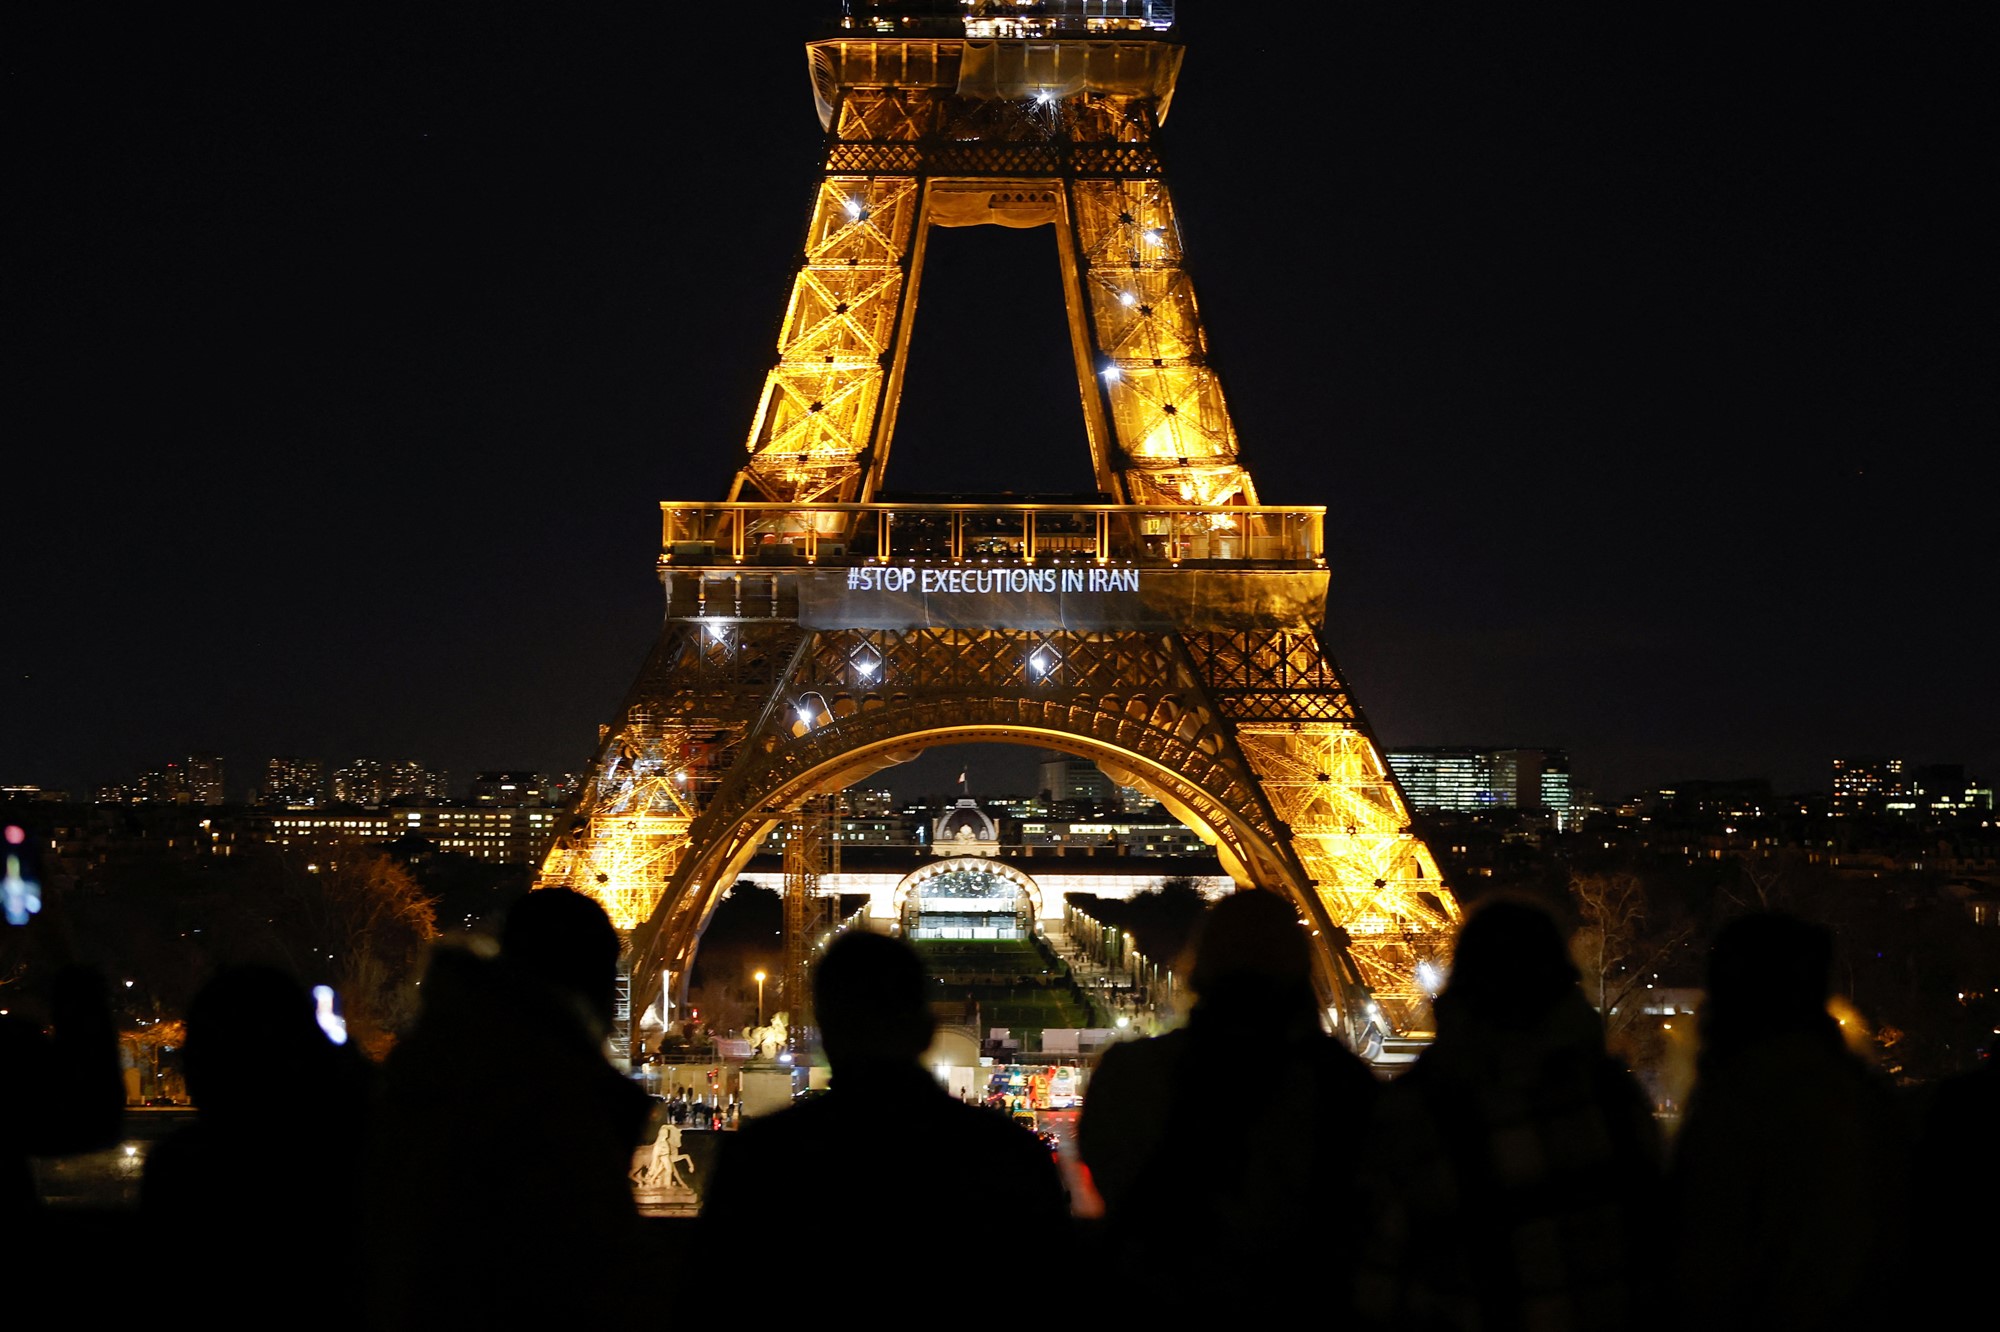 People take photos of the Eiffel Tower at night with the words #StopExecutionsInIran projected.